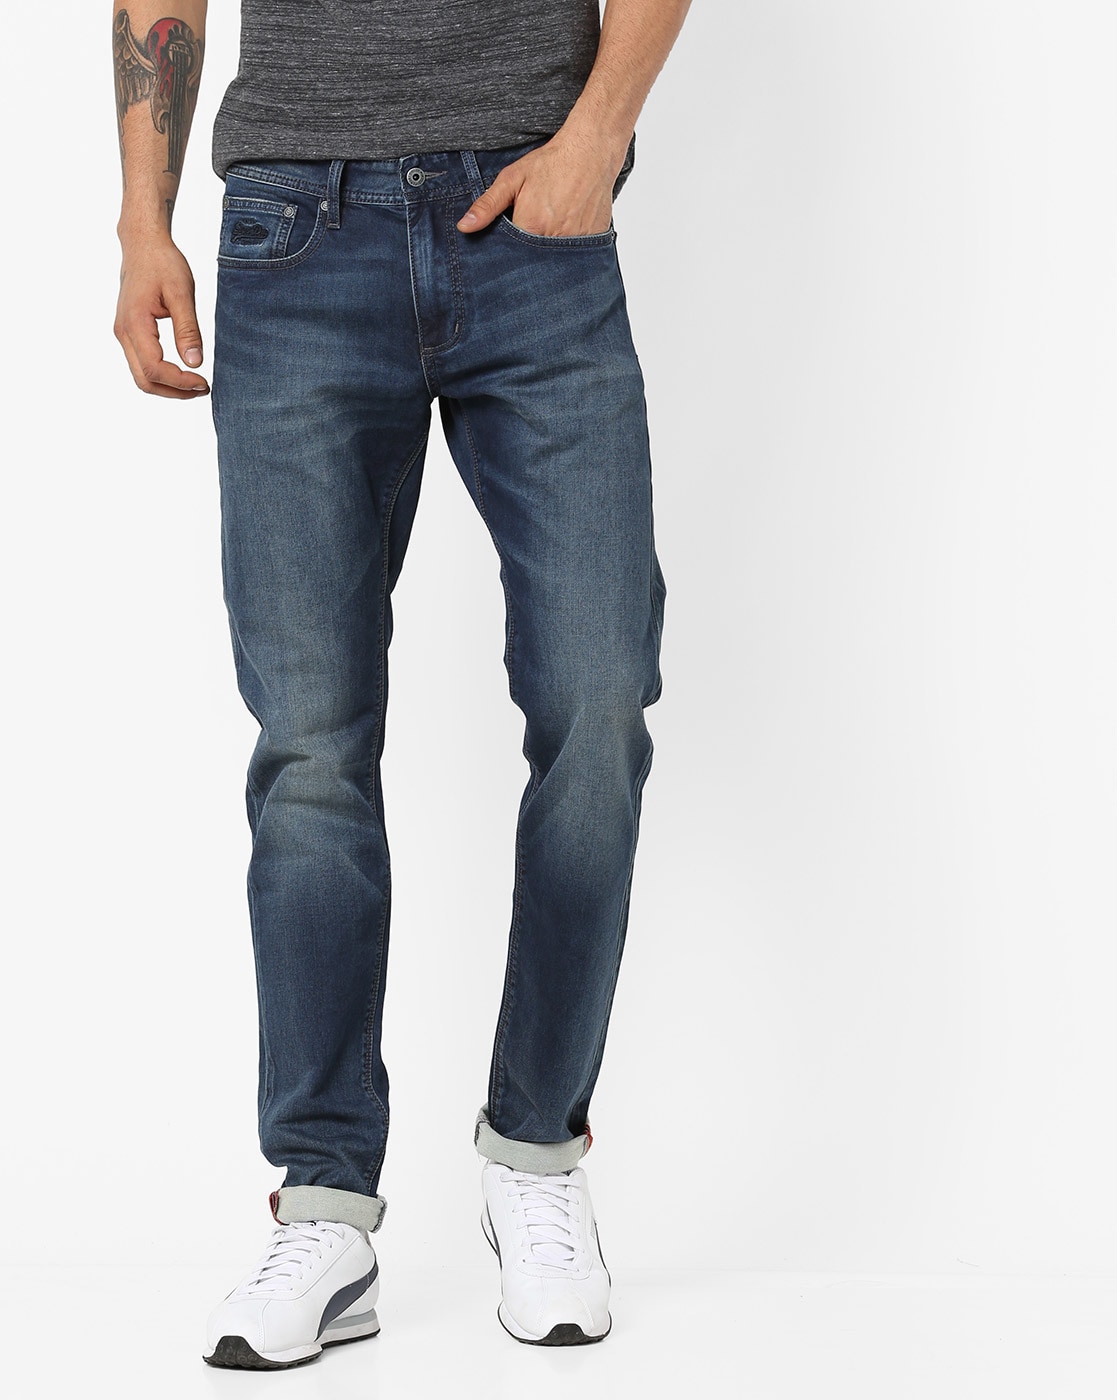 Buy Jeans for Men by SUPERDRY Ajio.com